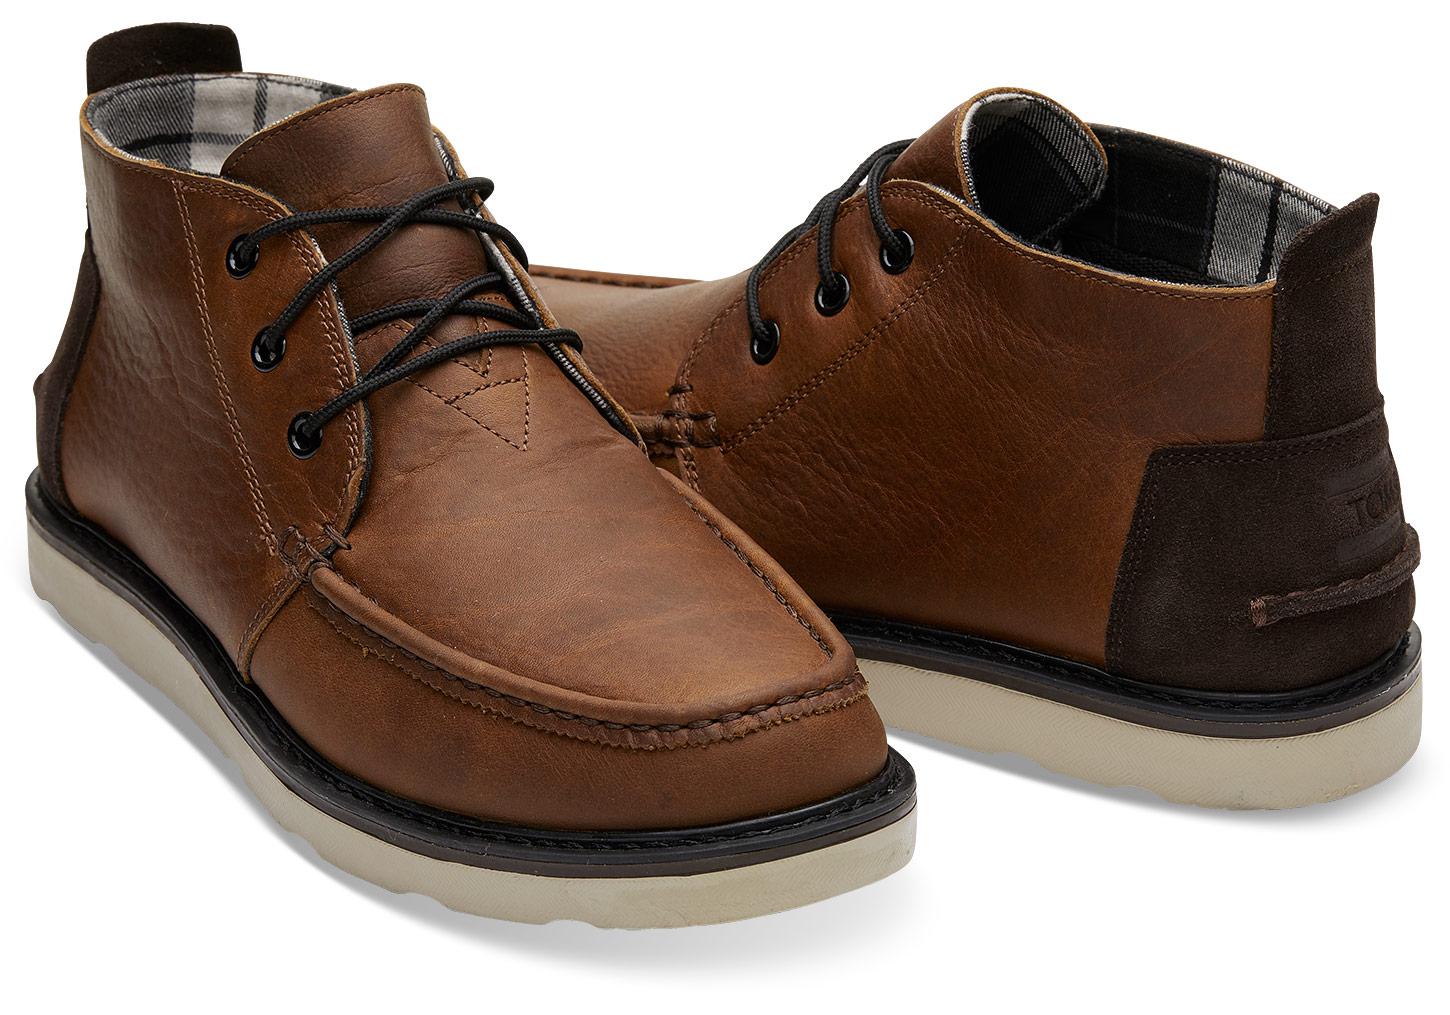 Lyst - Toms Waterproof Brown Pull Up Leather Men's Chukka Boots in ...